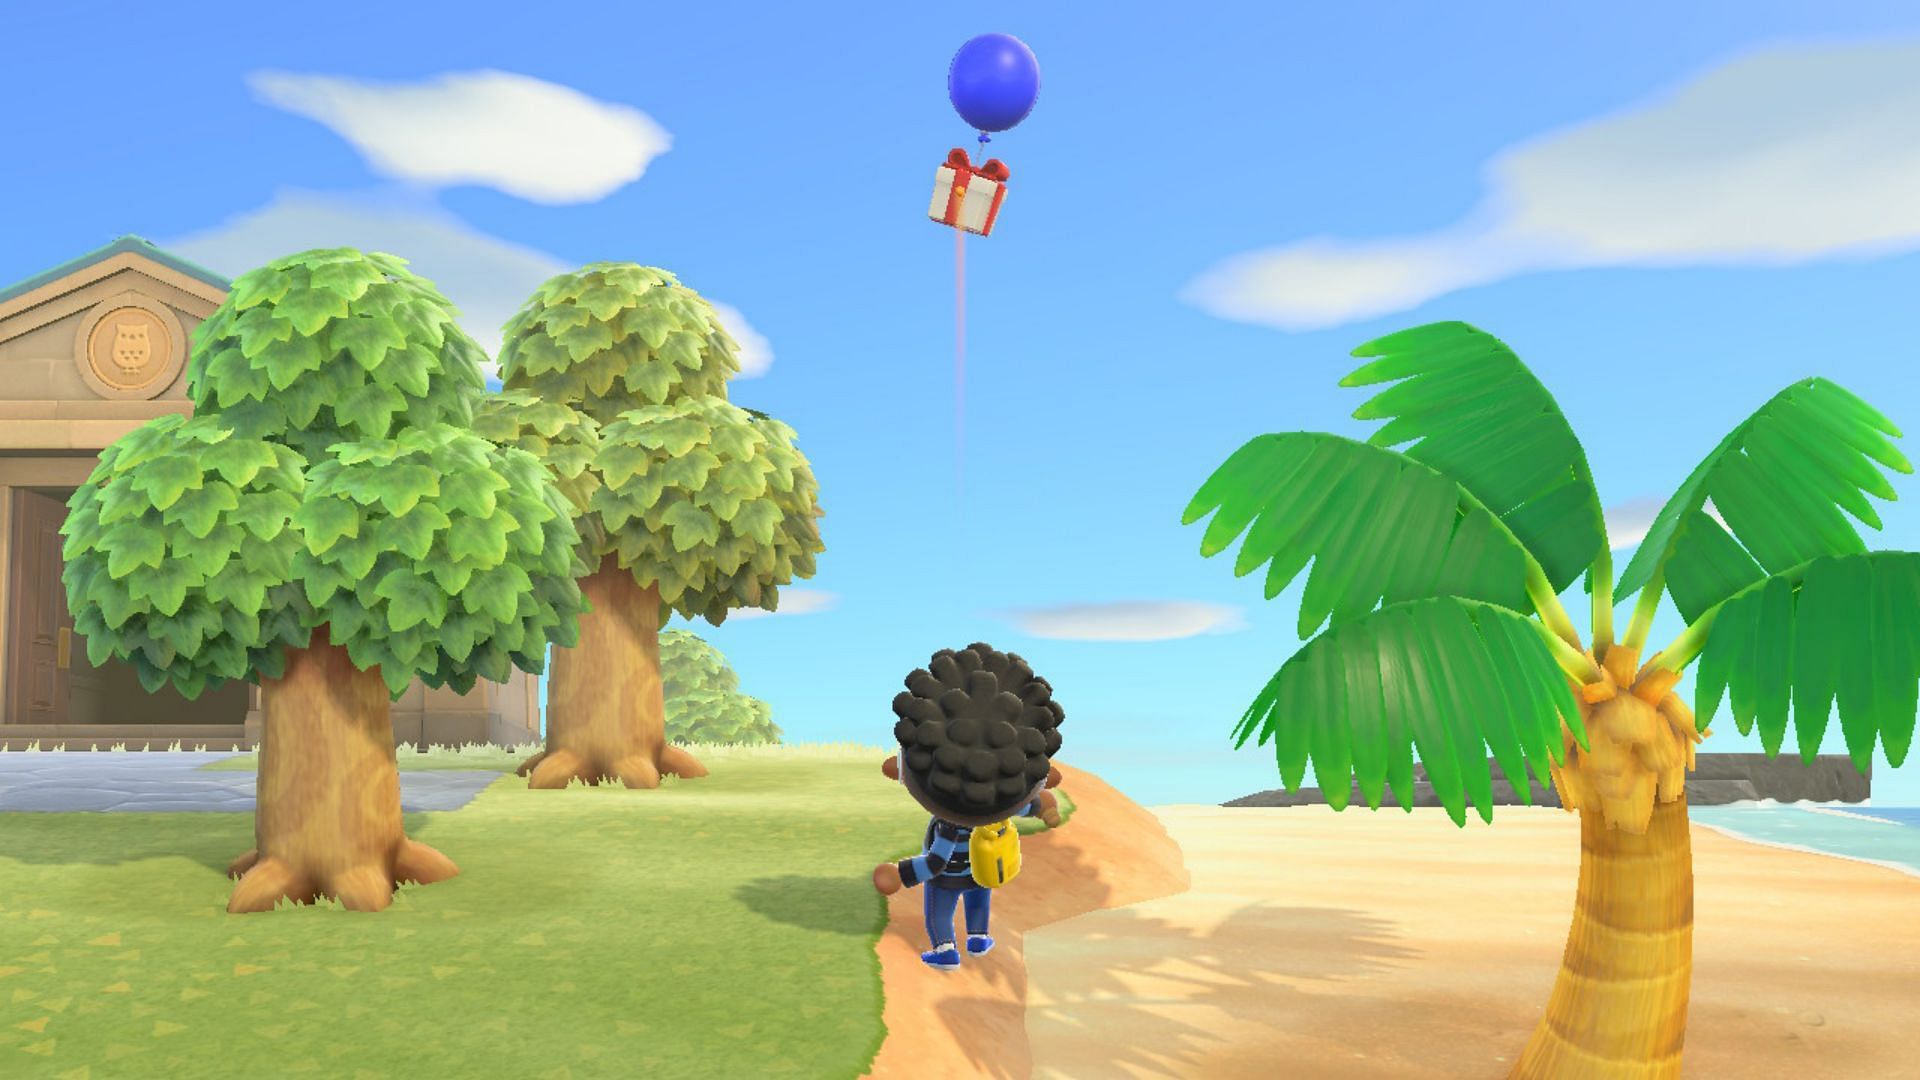 Shoot the balloon when it is in the north. (Image via Nintendo)